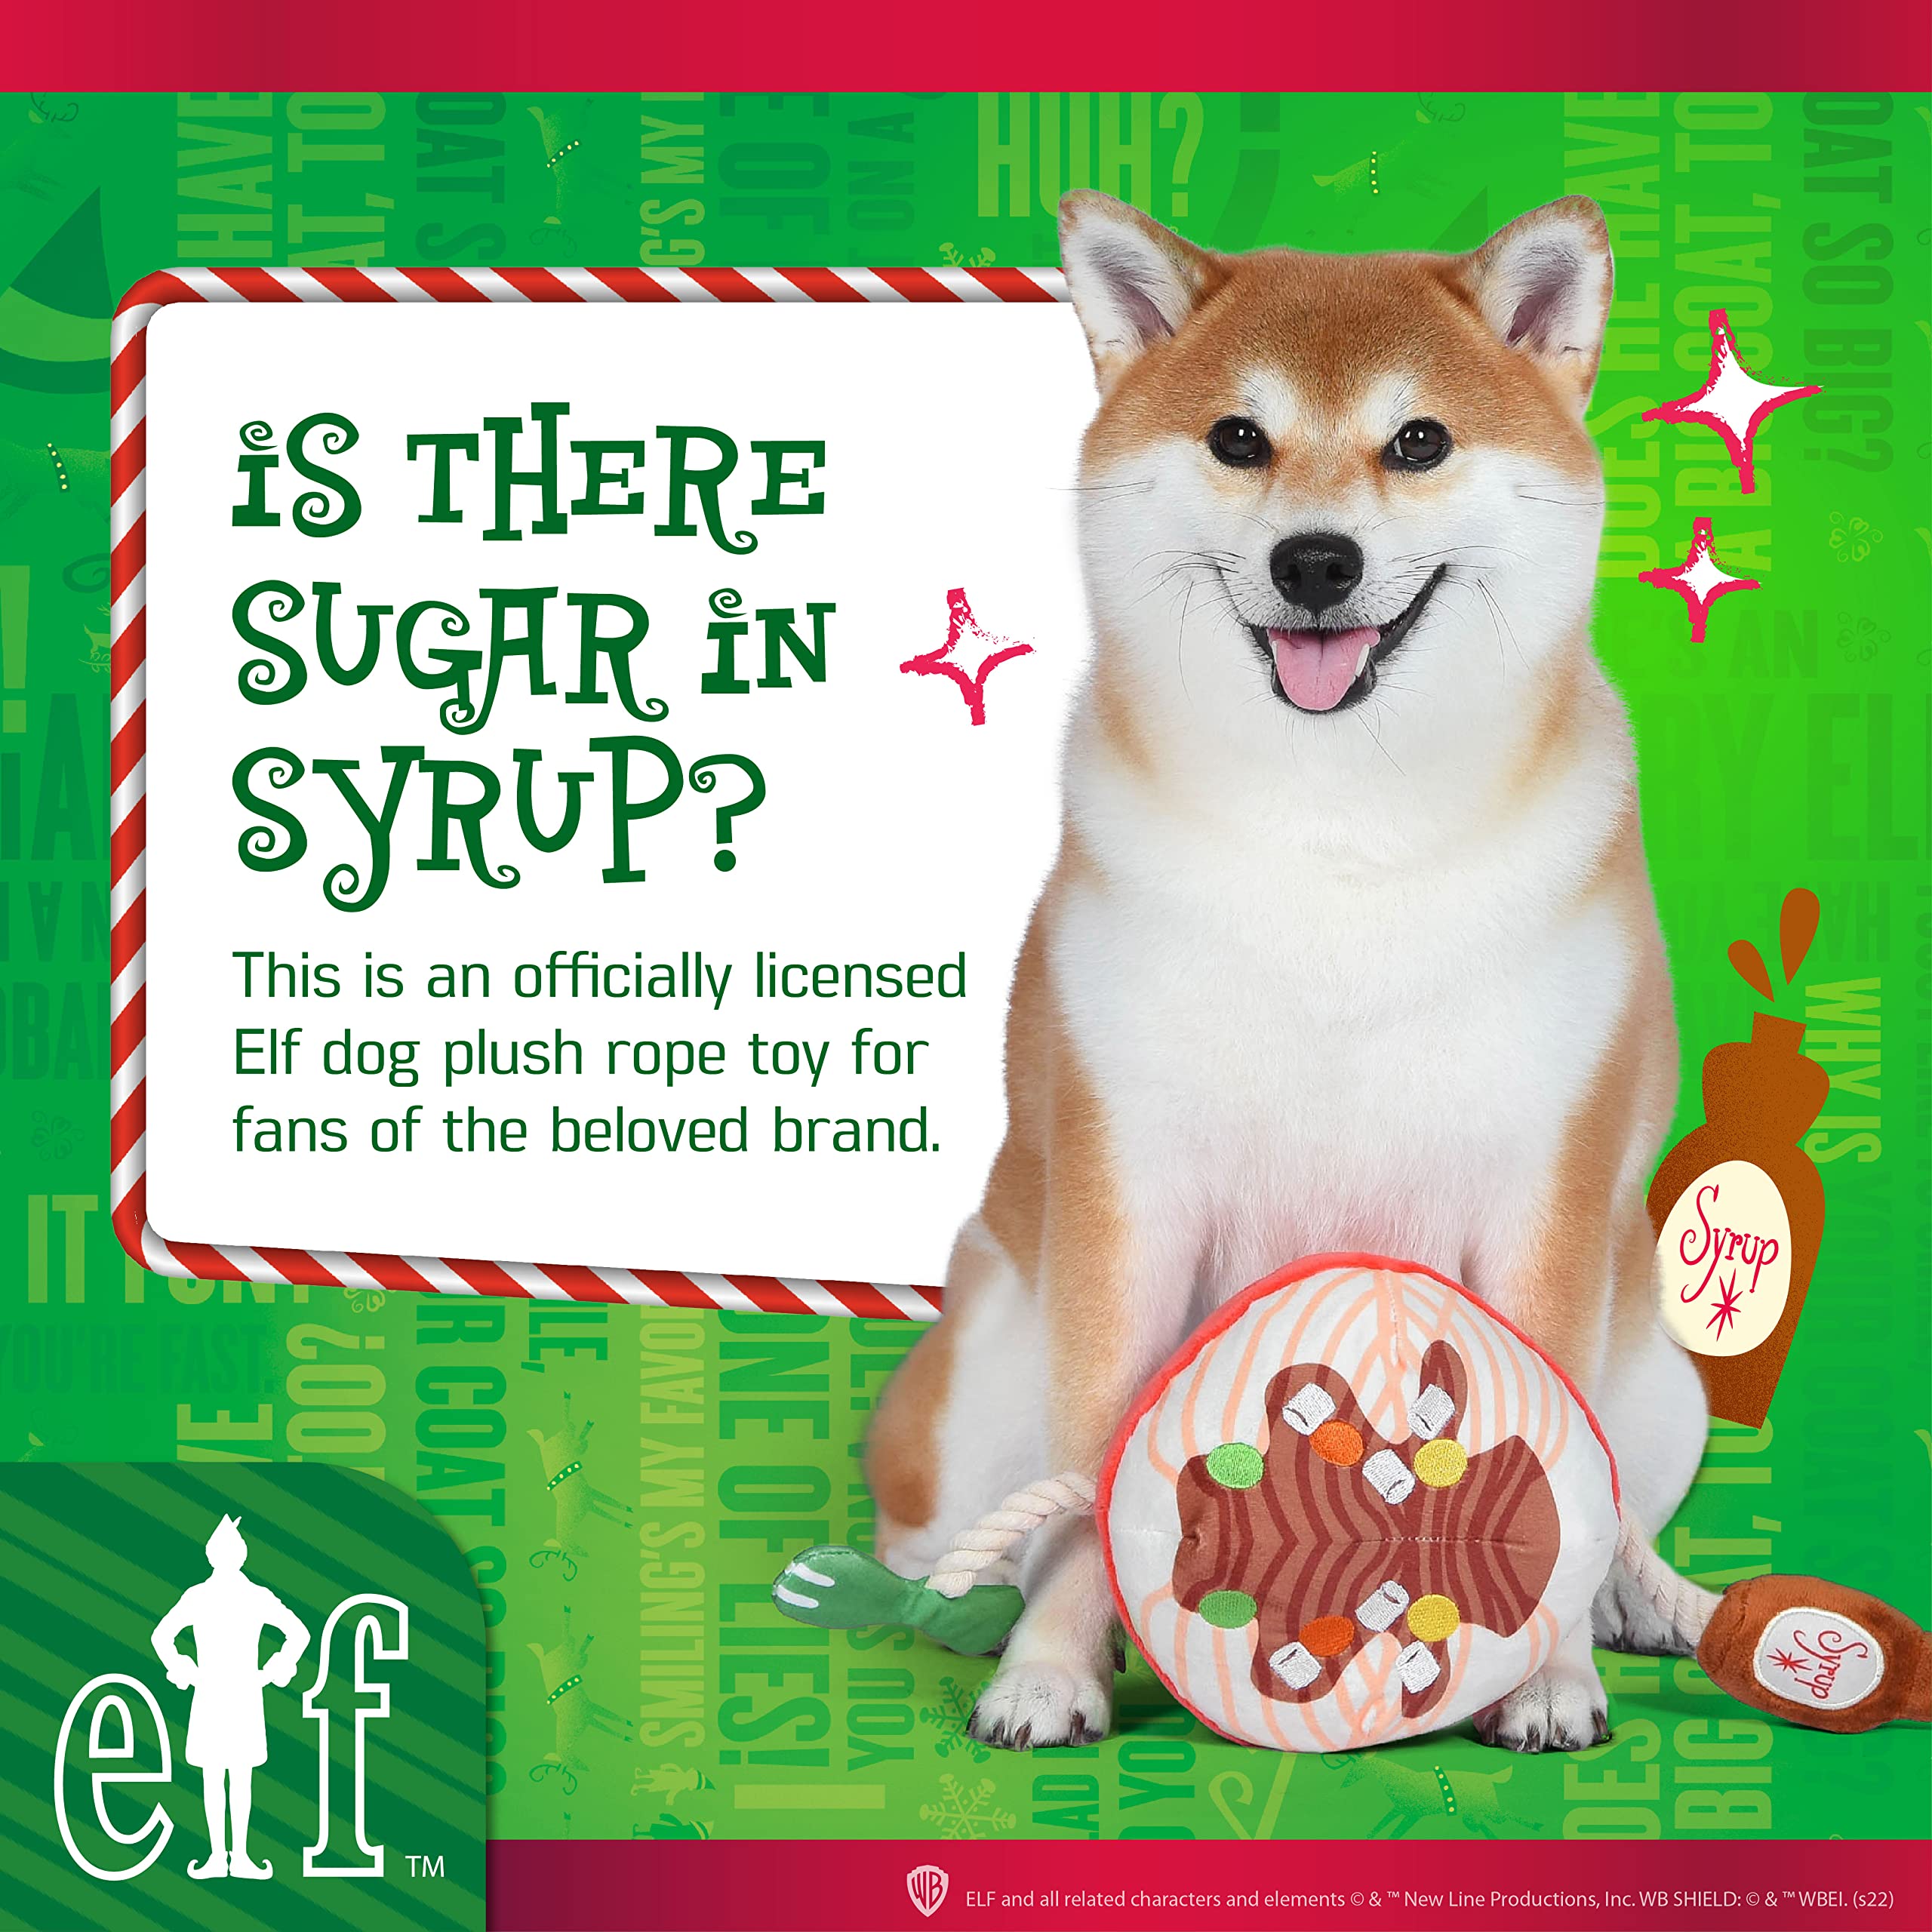 6" Elf Maple Syrup & Spaghetti Squeaky Plush & Rope Activity Dog Toy $3.42 + Free Shipping w/ Prime or on $35+